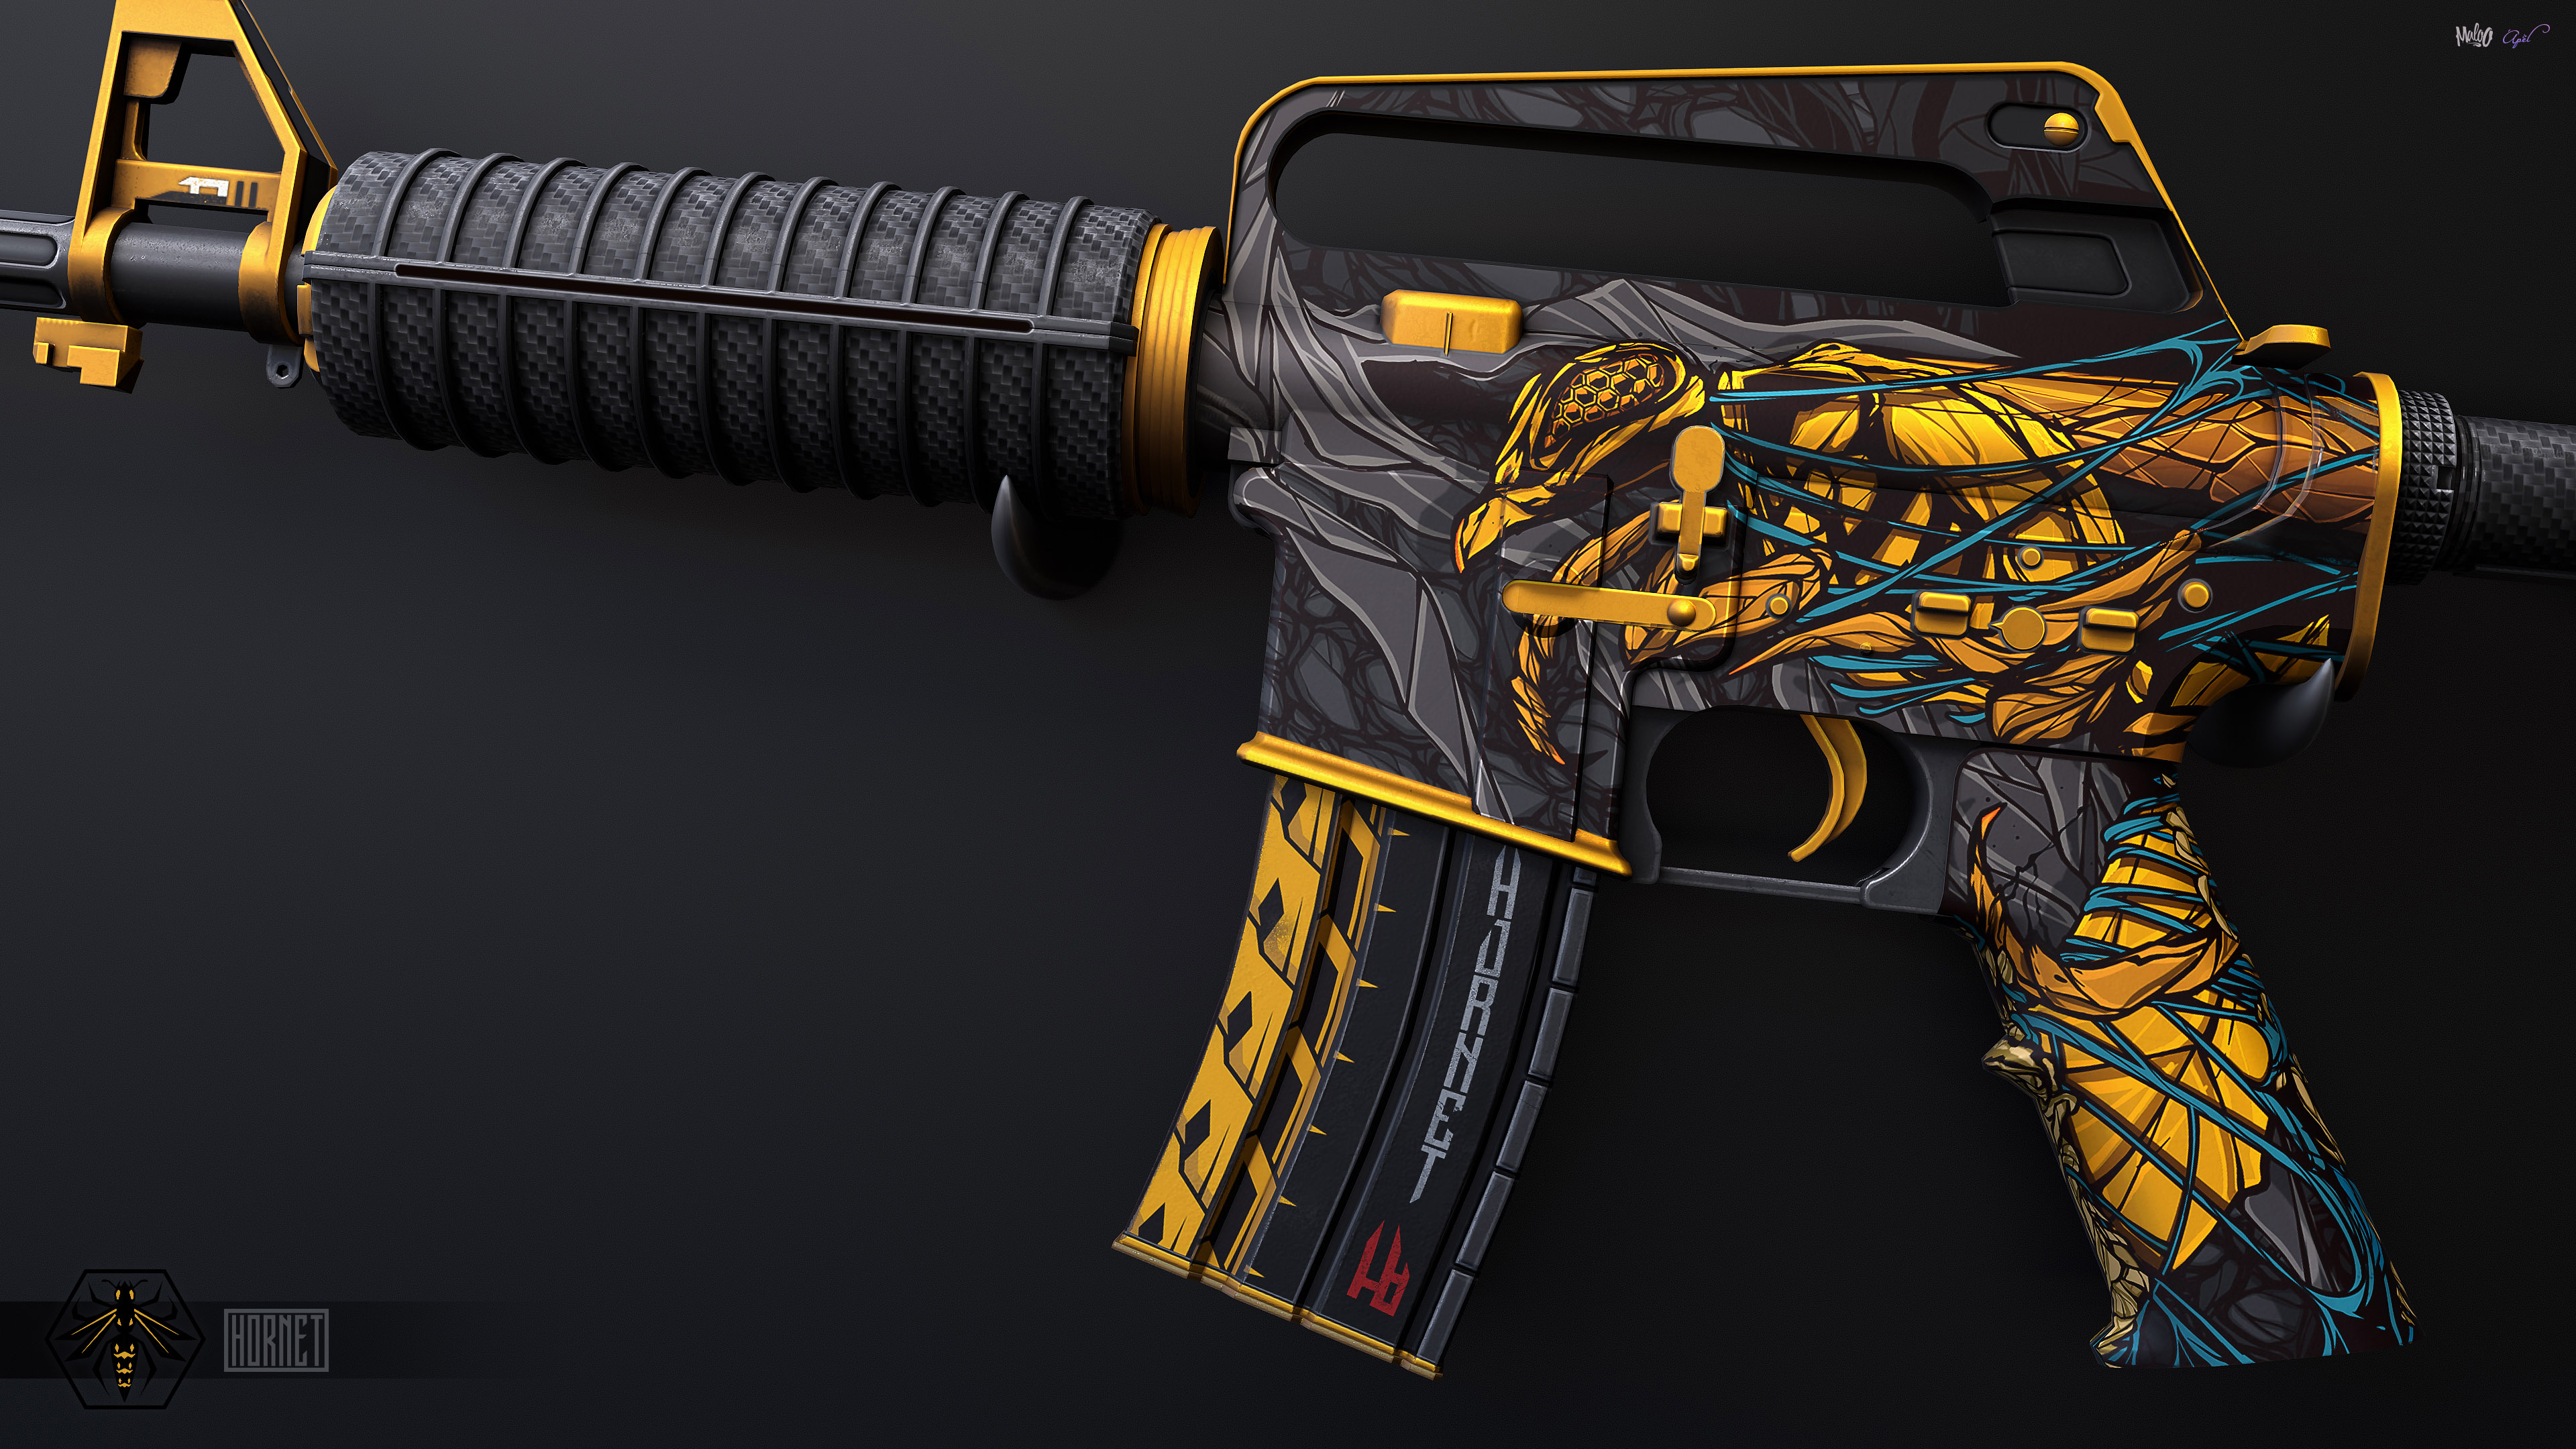 on the @CSGO #SkinSunday where we'll be highlighting skins from the Steam Community Workshop! To kick things off we have the M4A1-S | Hornet! 🎨 https://t.co/tSX4JAga1m / X